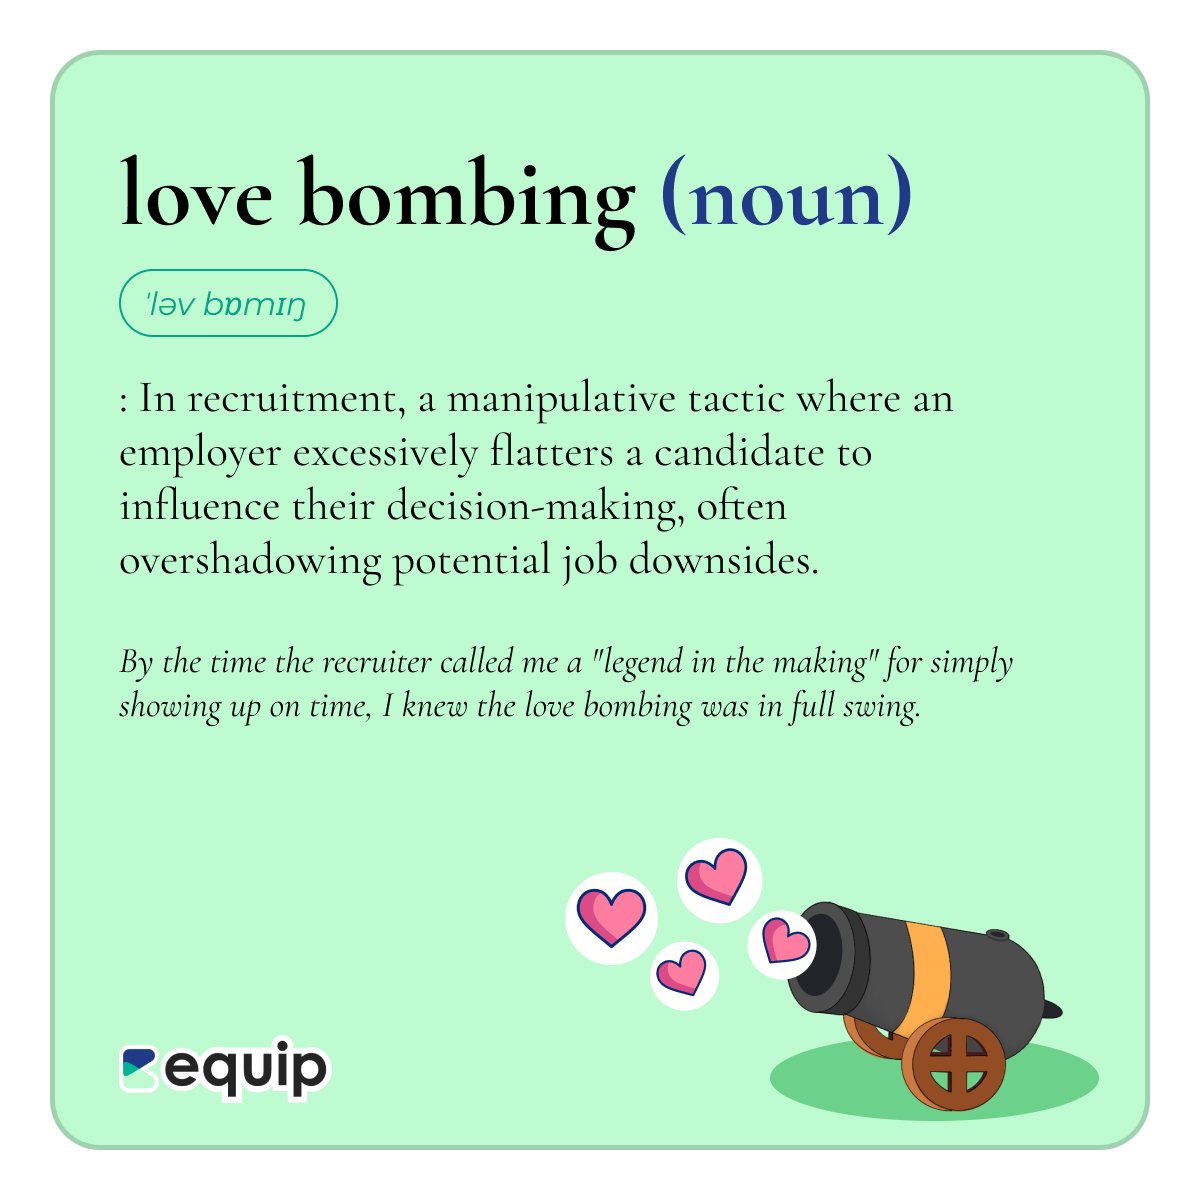 Are you guilty of love bombing your candidates while hiring? Let us know in the comments.

#TalentAcquisition #HRCommunity #HiringTips #Recruiting #RecruitingLife